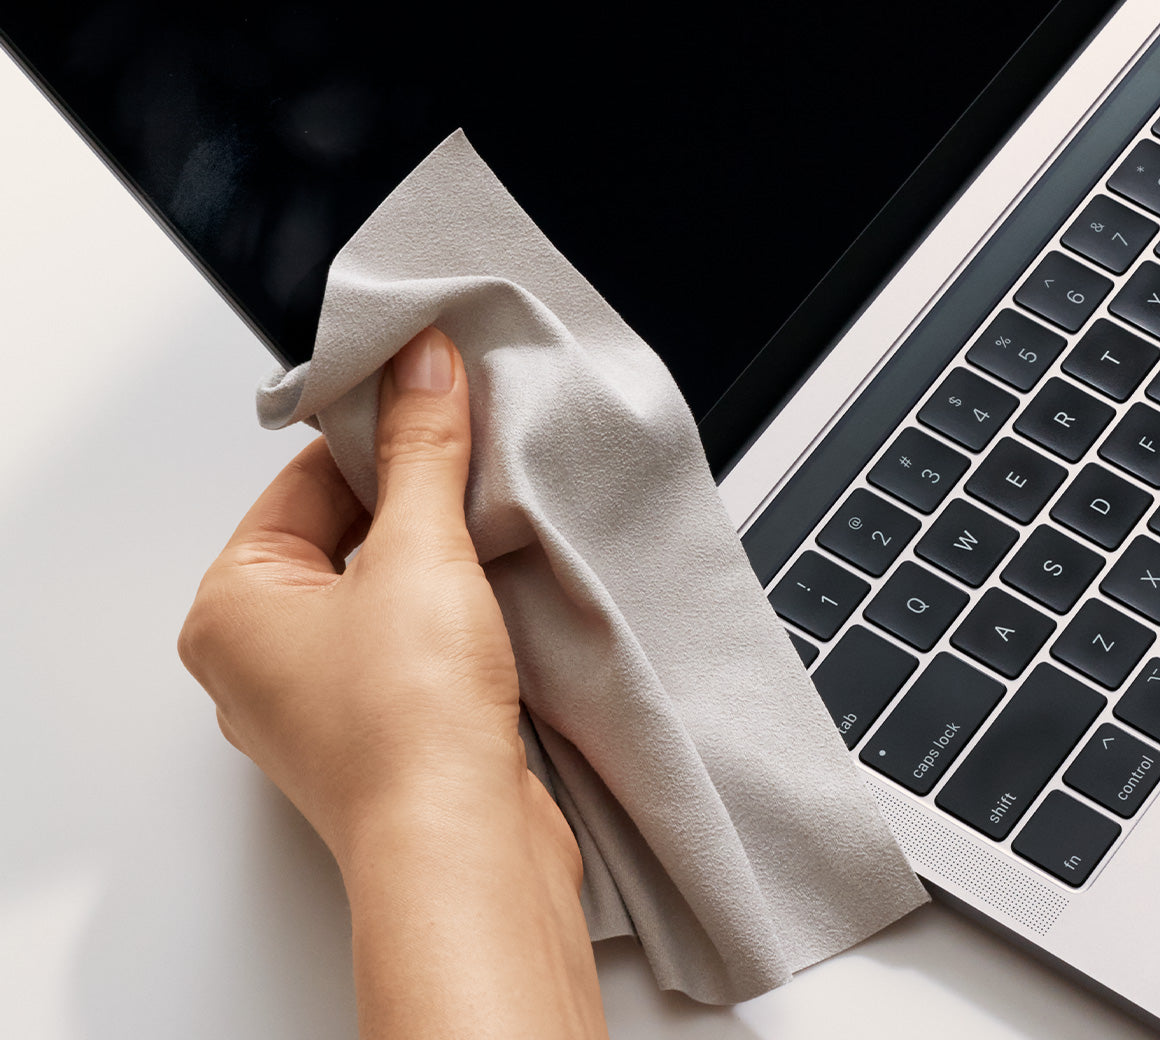 Cleaning a laptop screen with the cleaning cloth